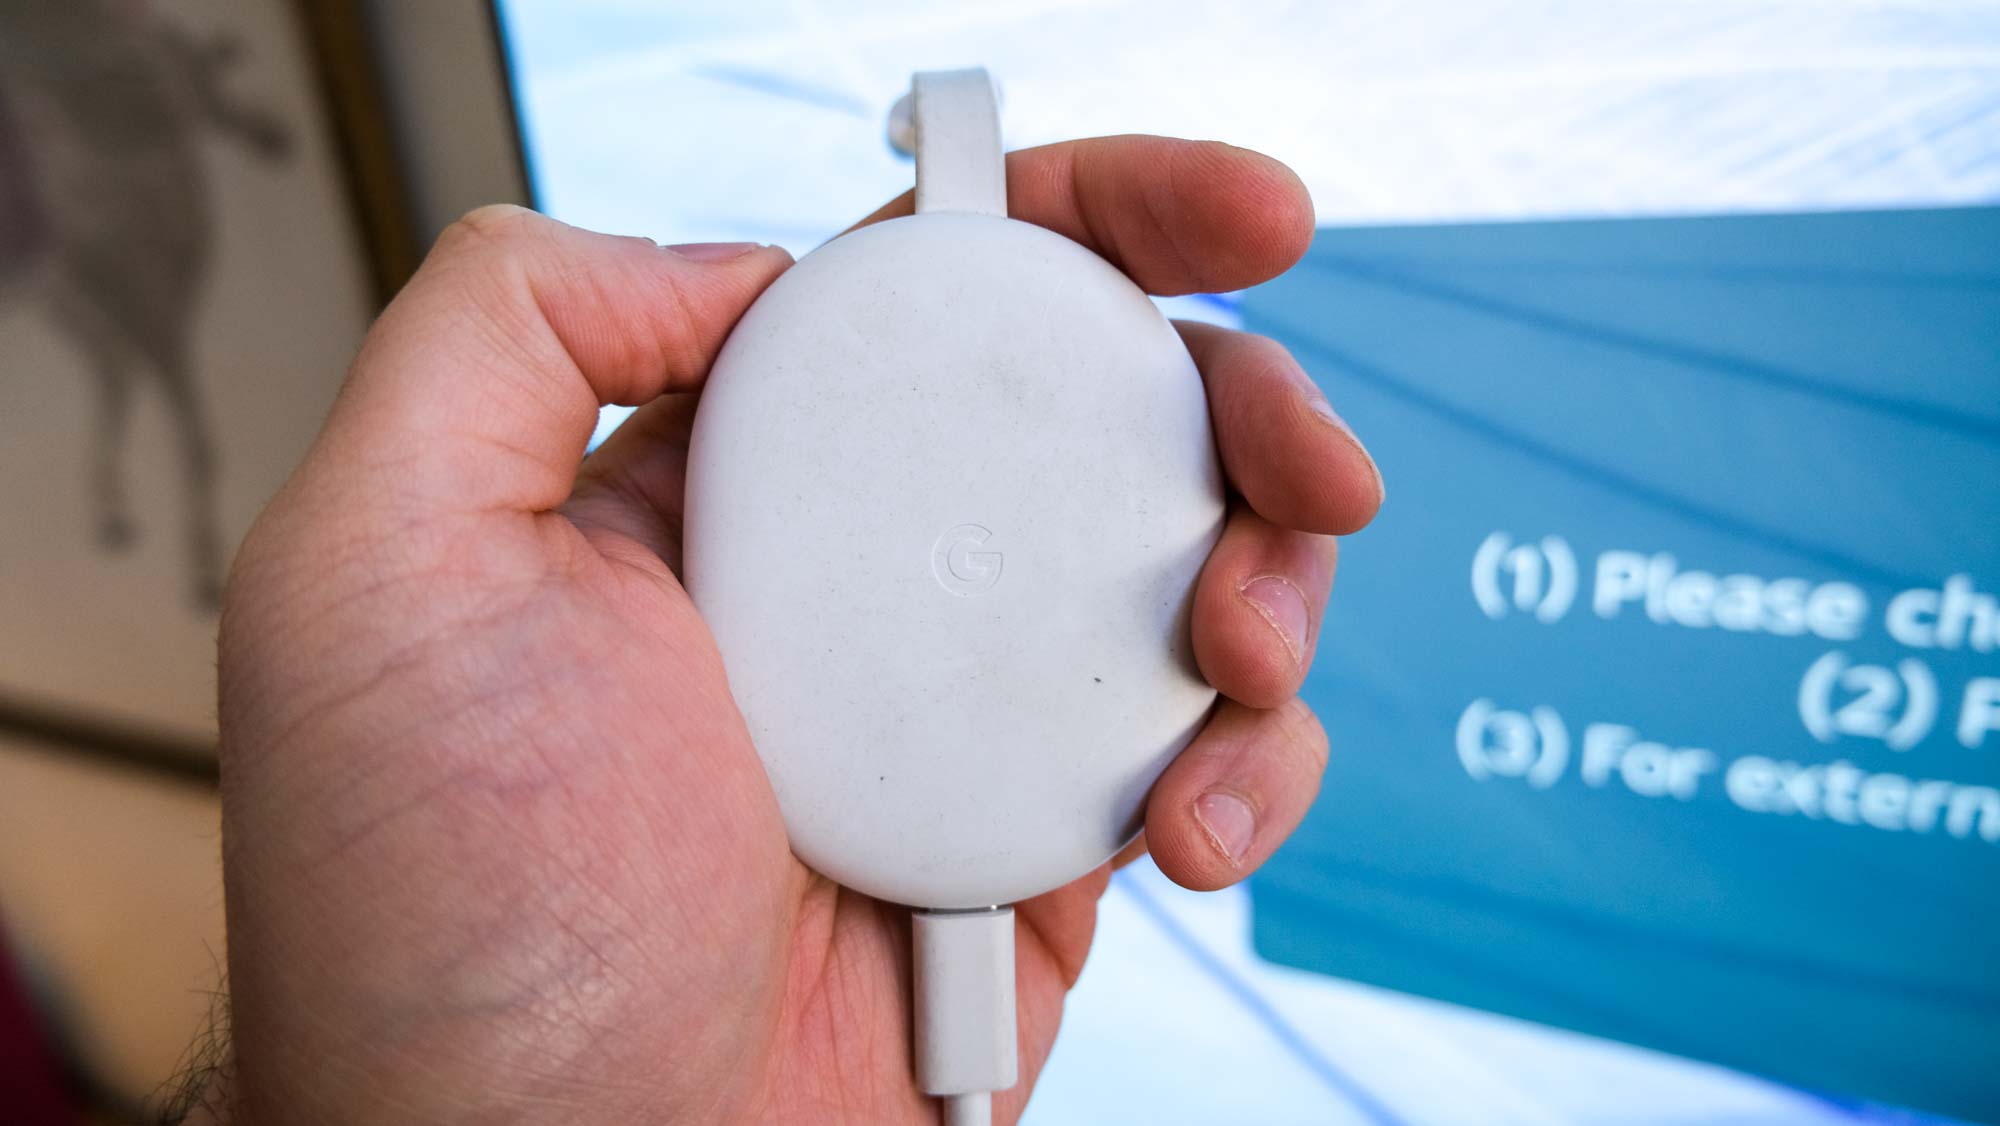 The Chromecast with Google TV in-hand